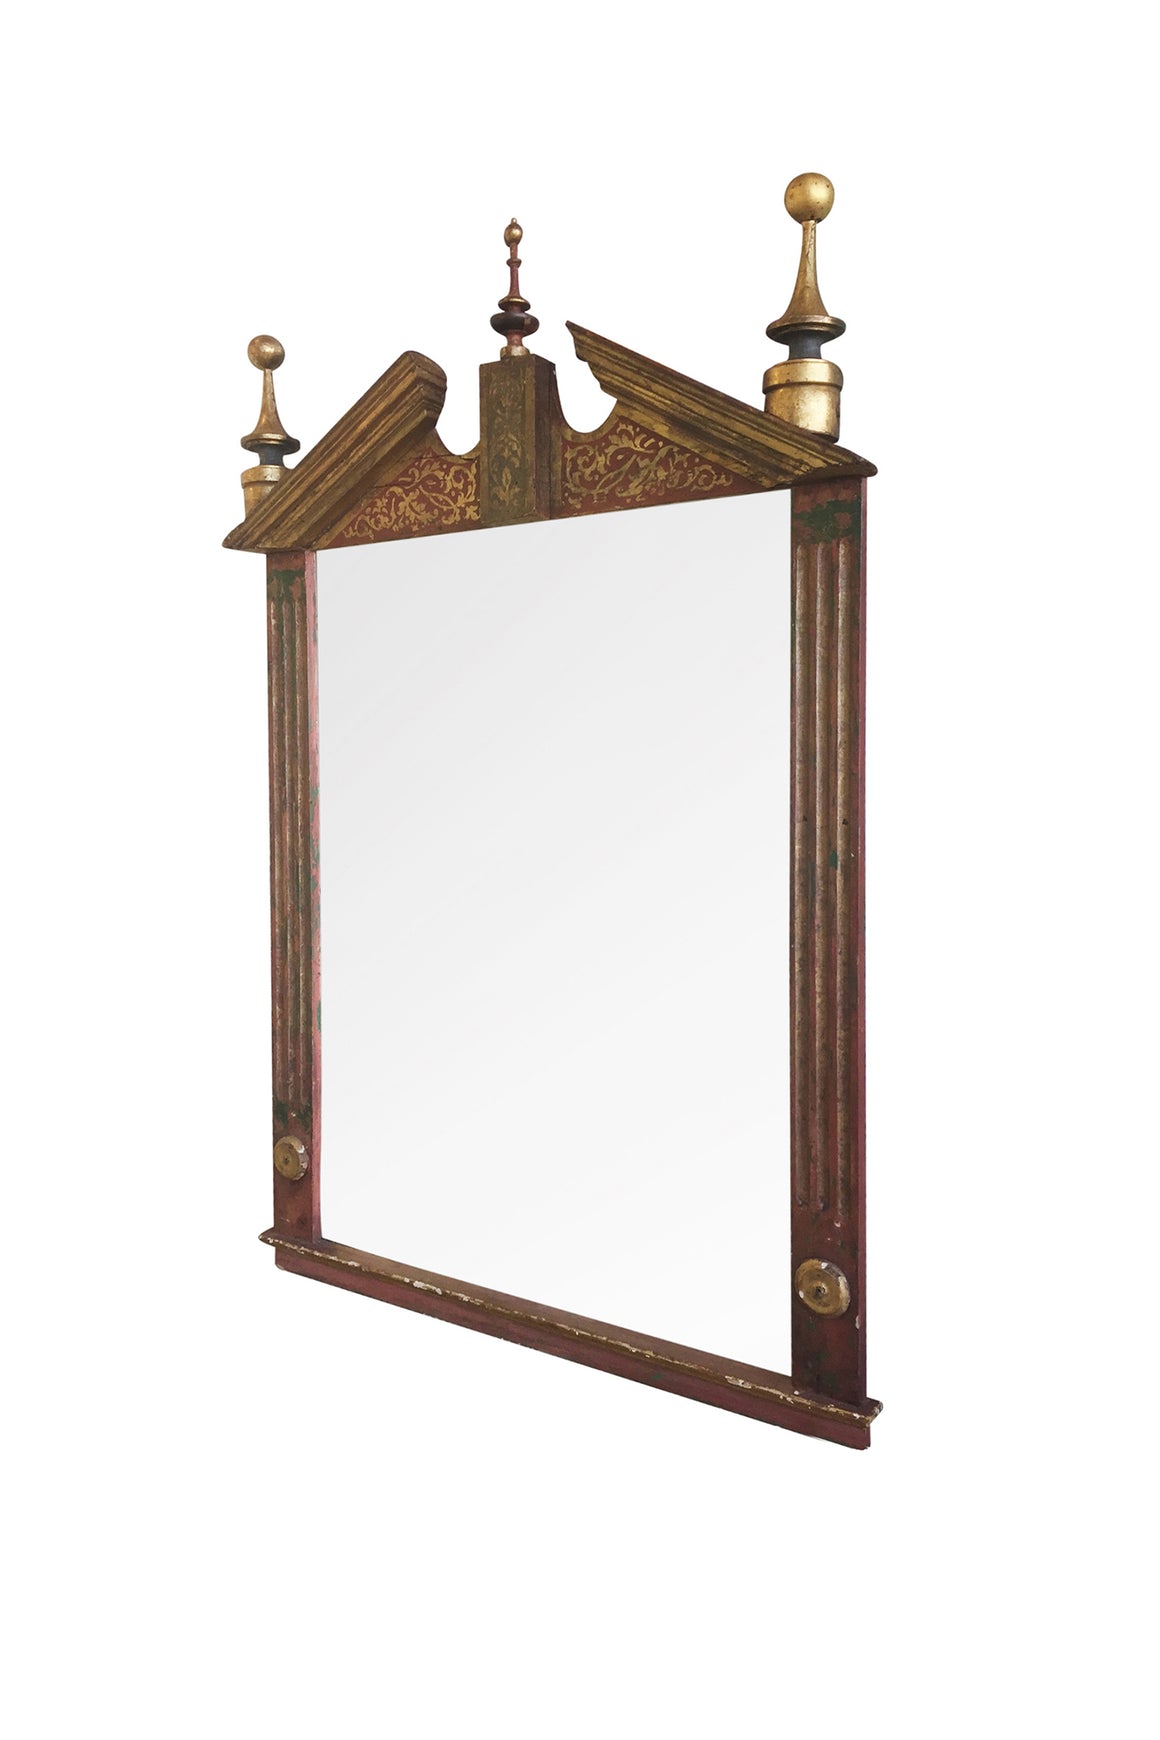 Early 20th Century Gilt Painted Mirror in the Neoclassical Style